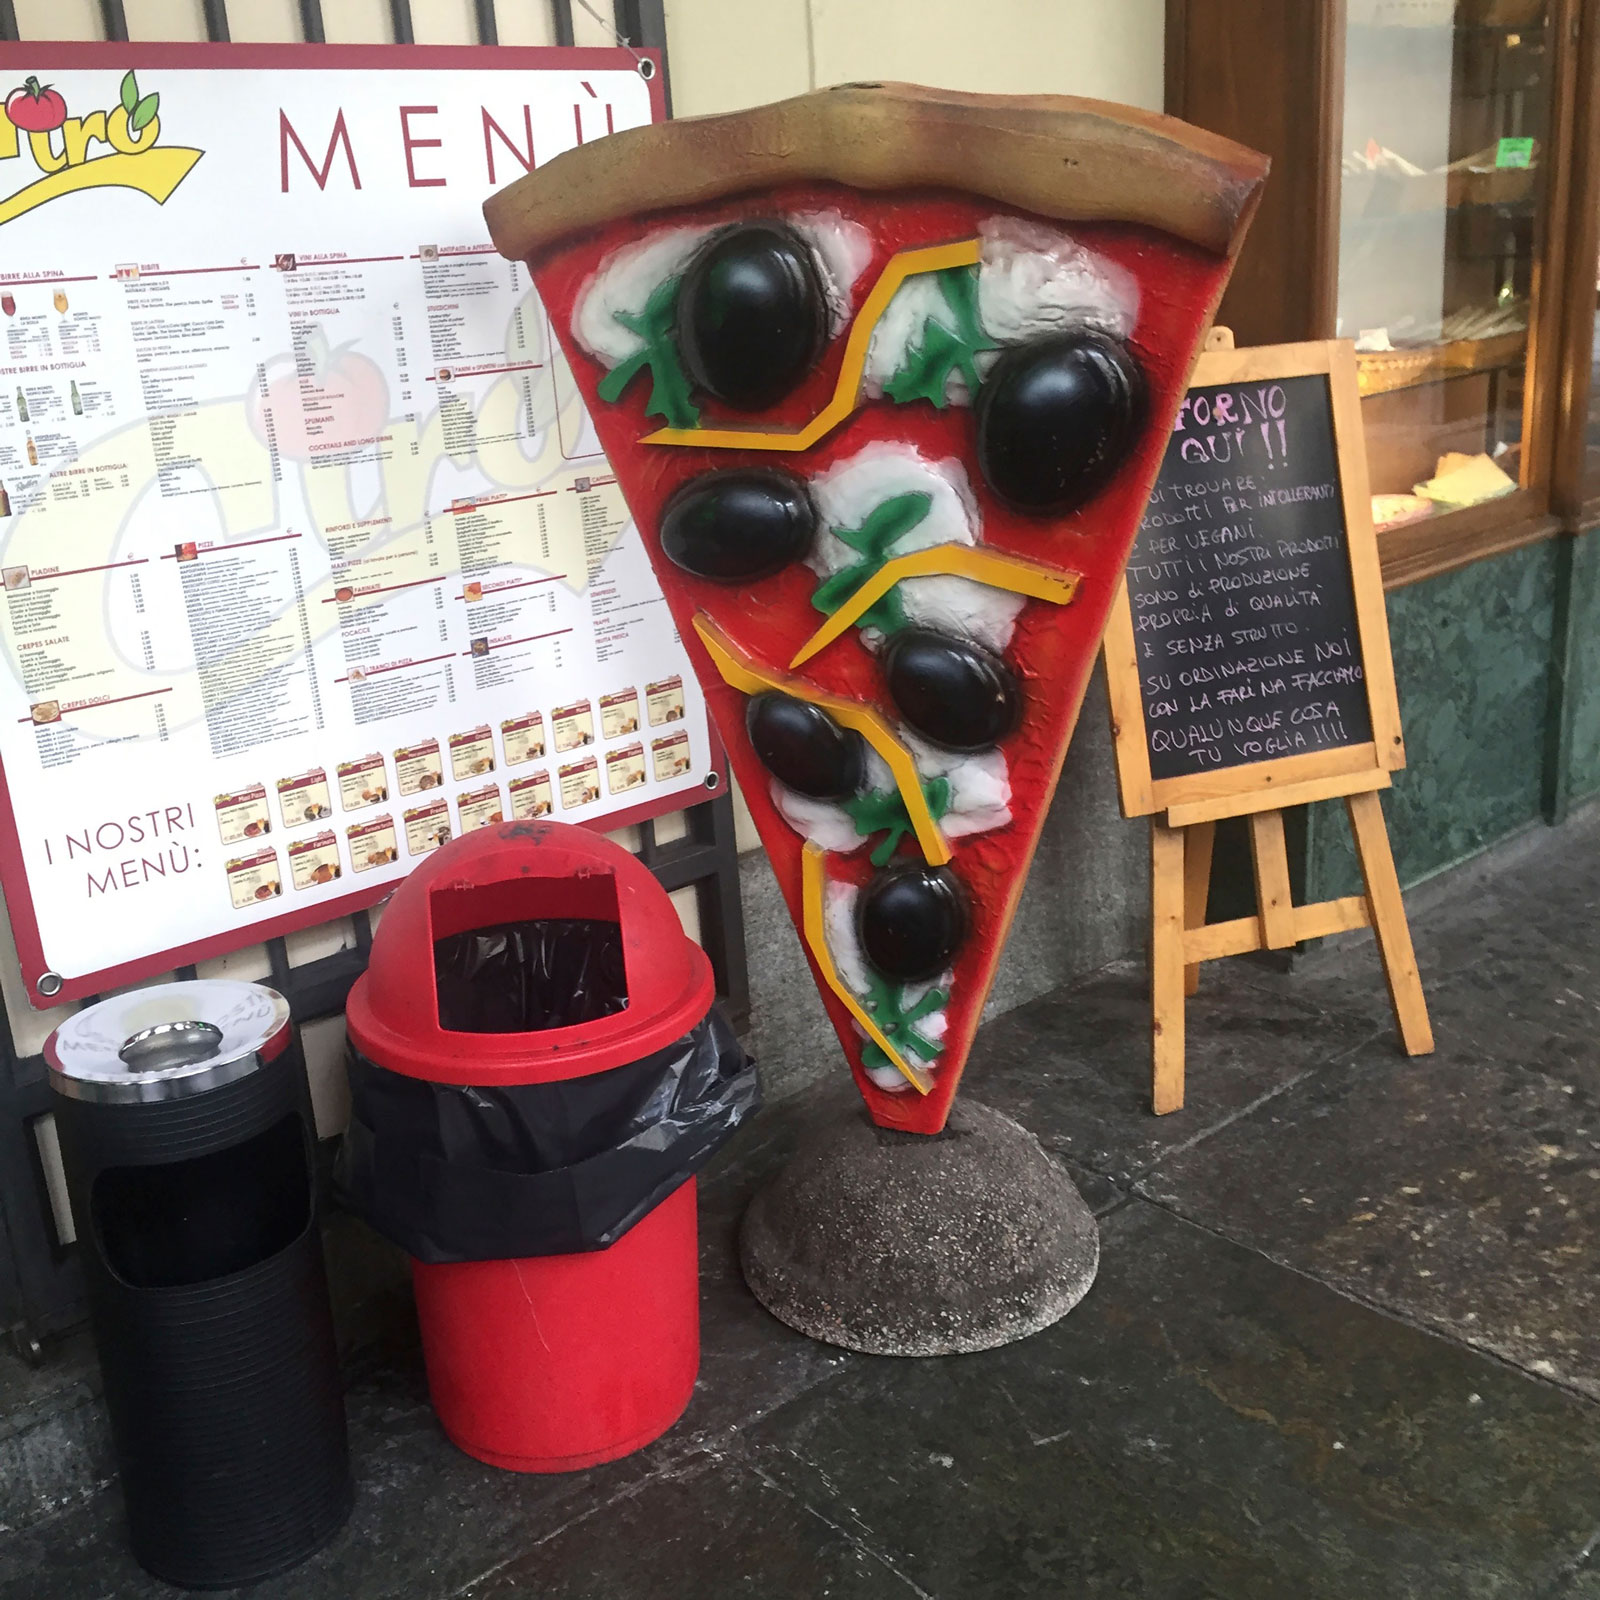 The Pizza Thought Experiment